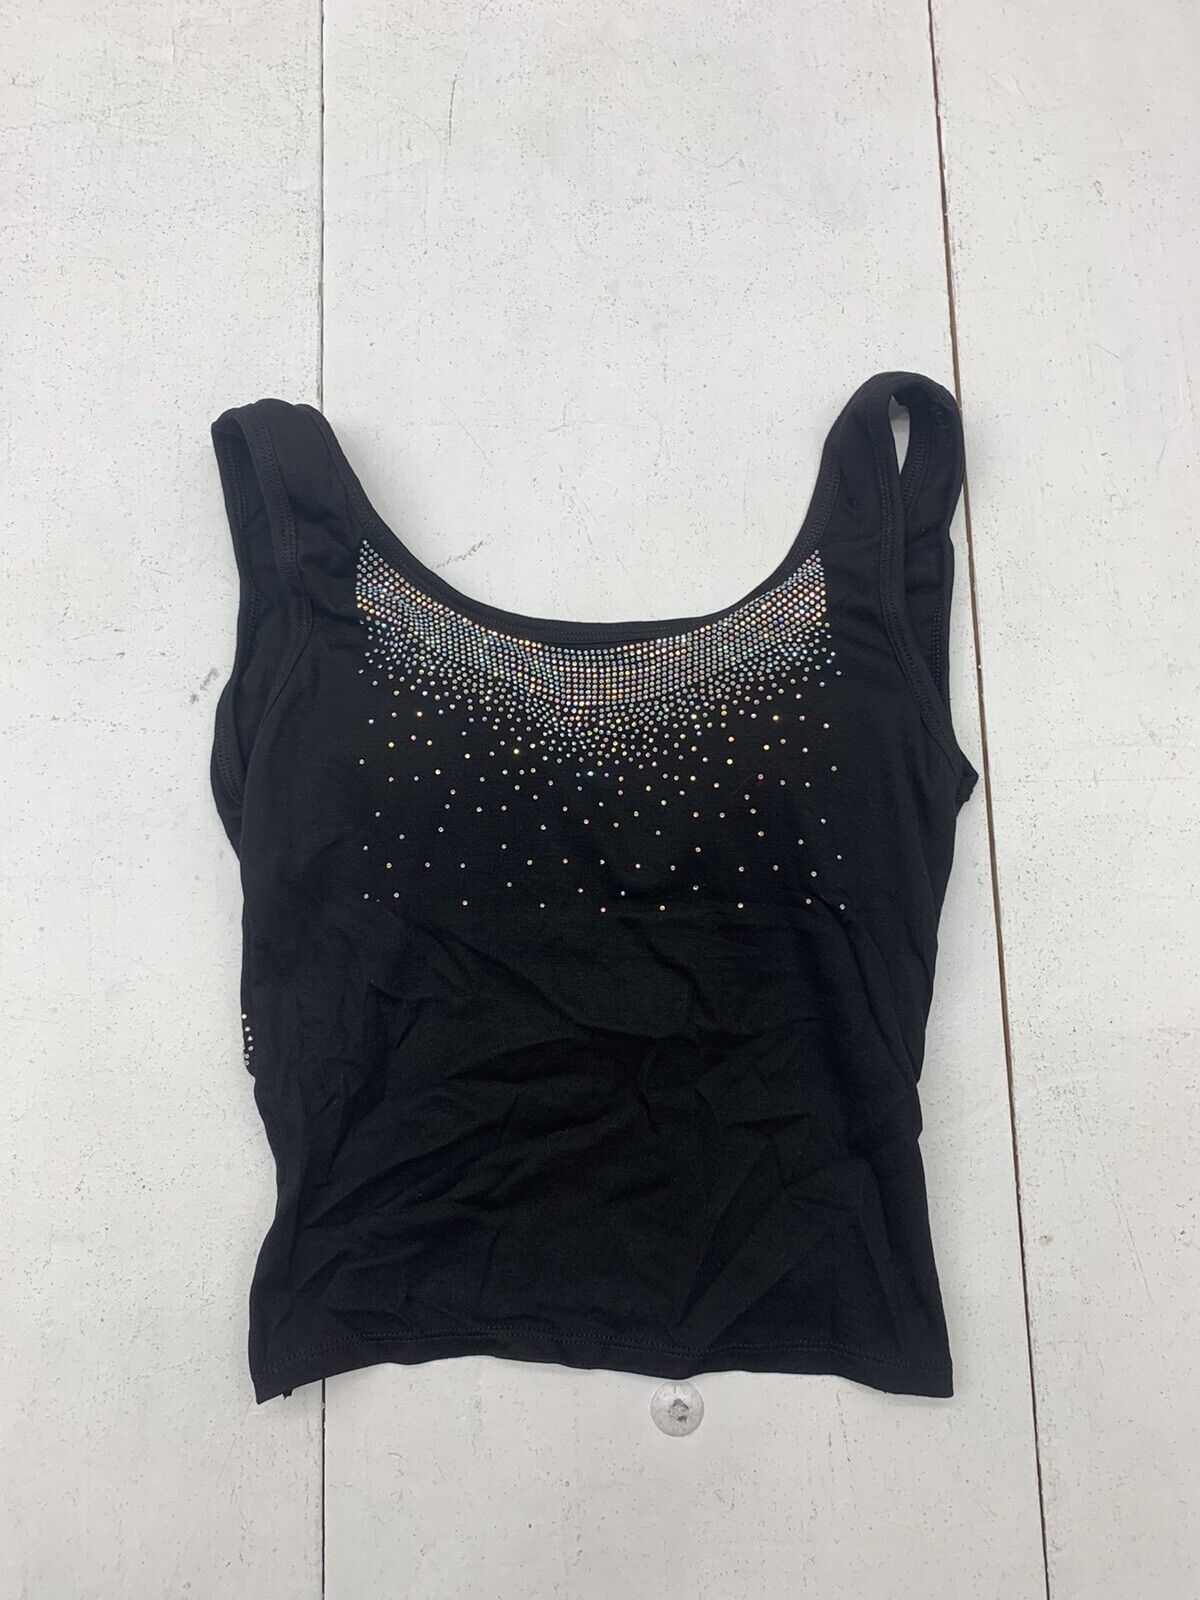 Unbranded Womens Black Jeweled Open Back Tank Size Small